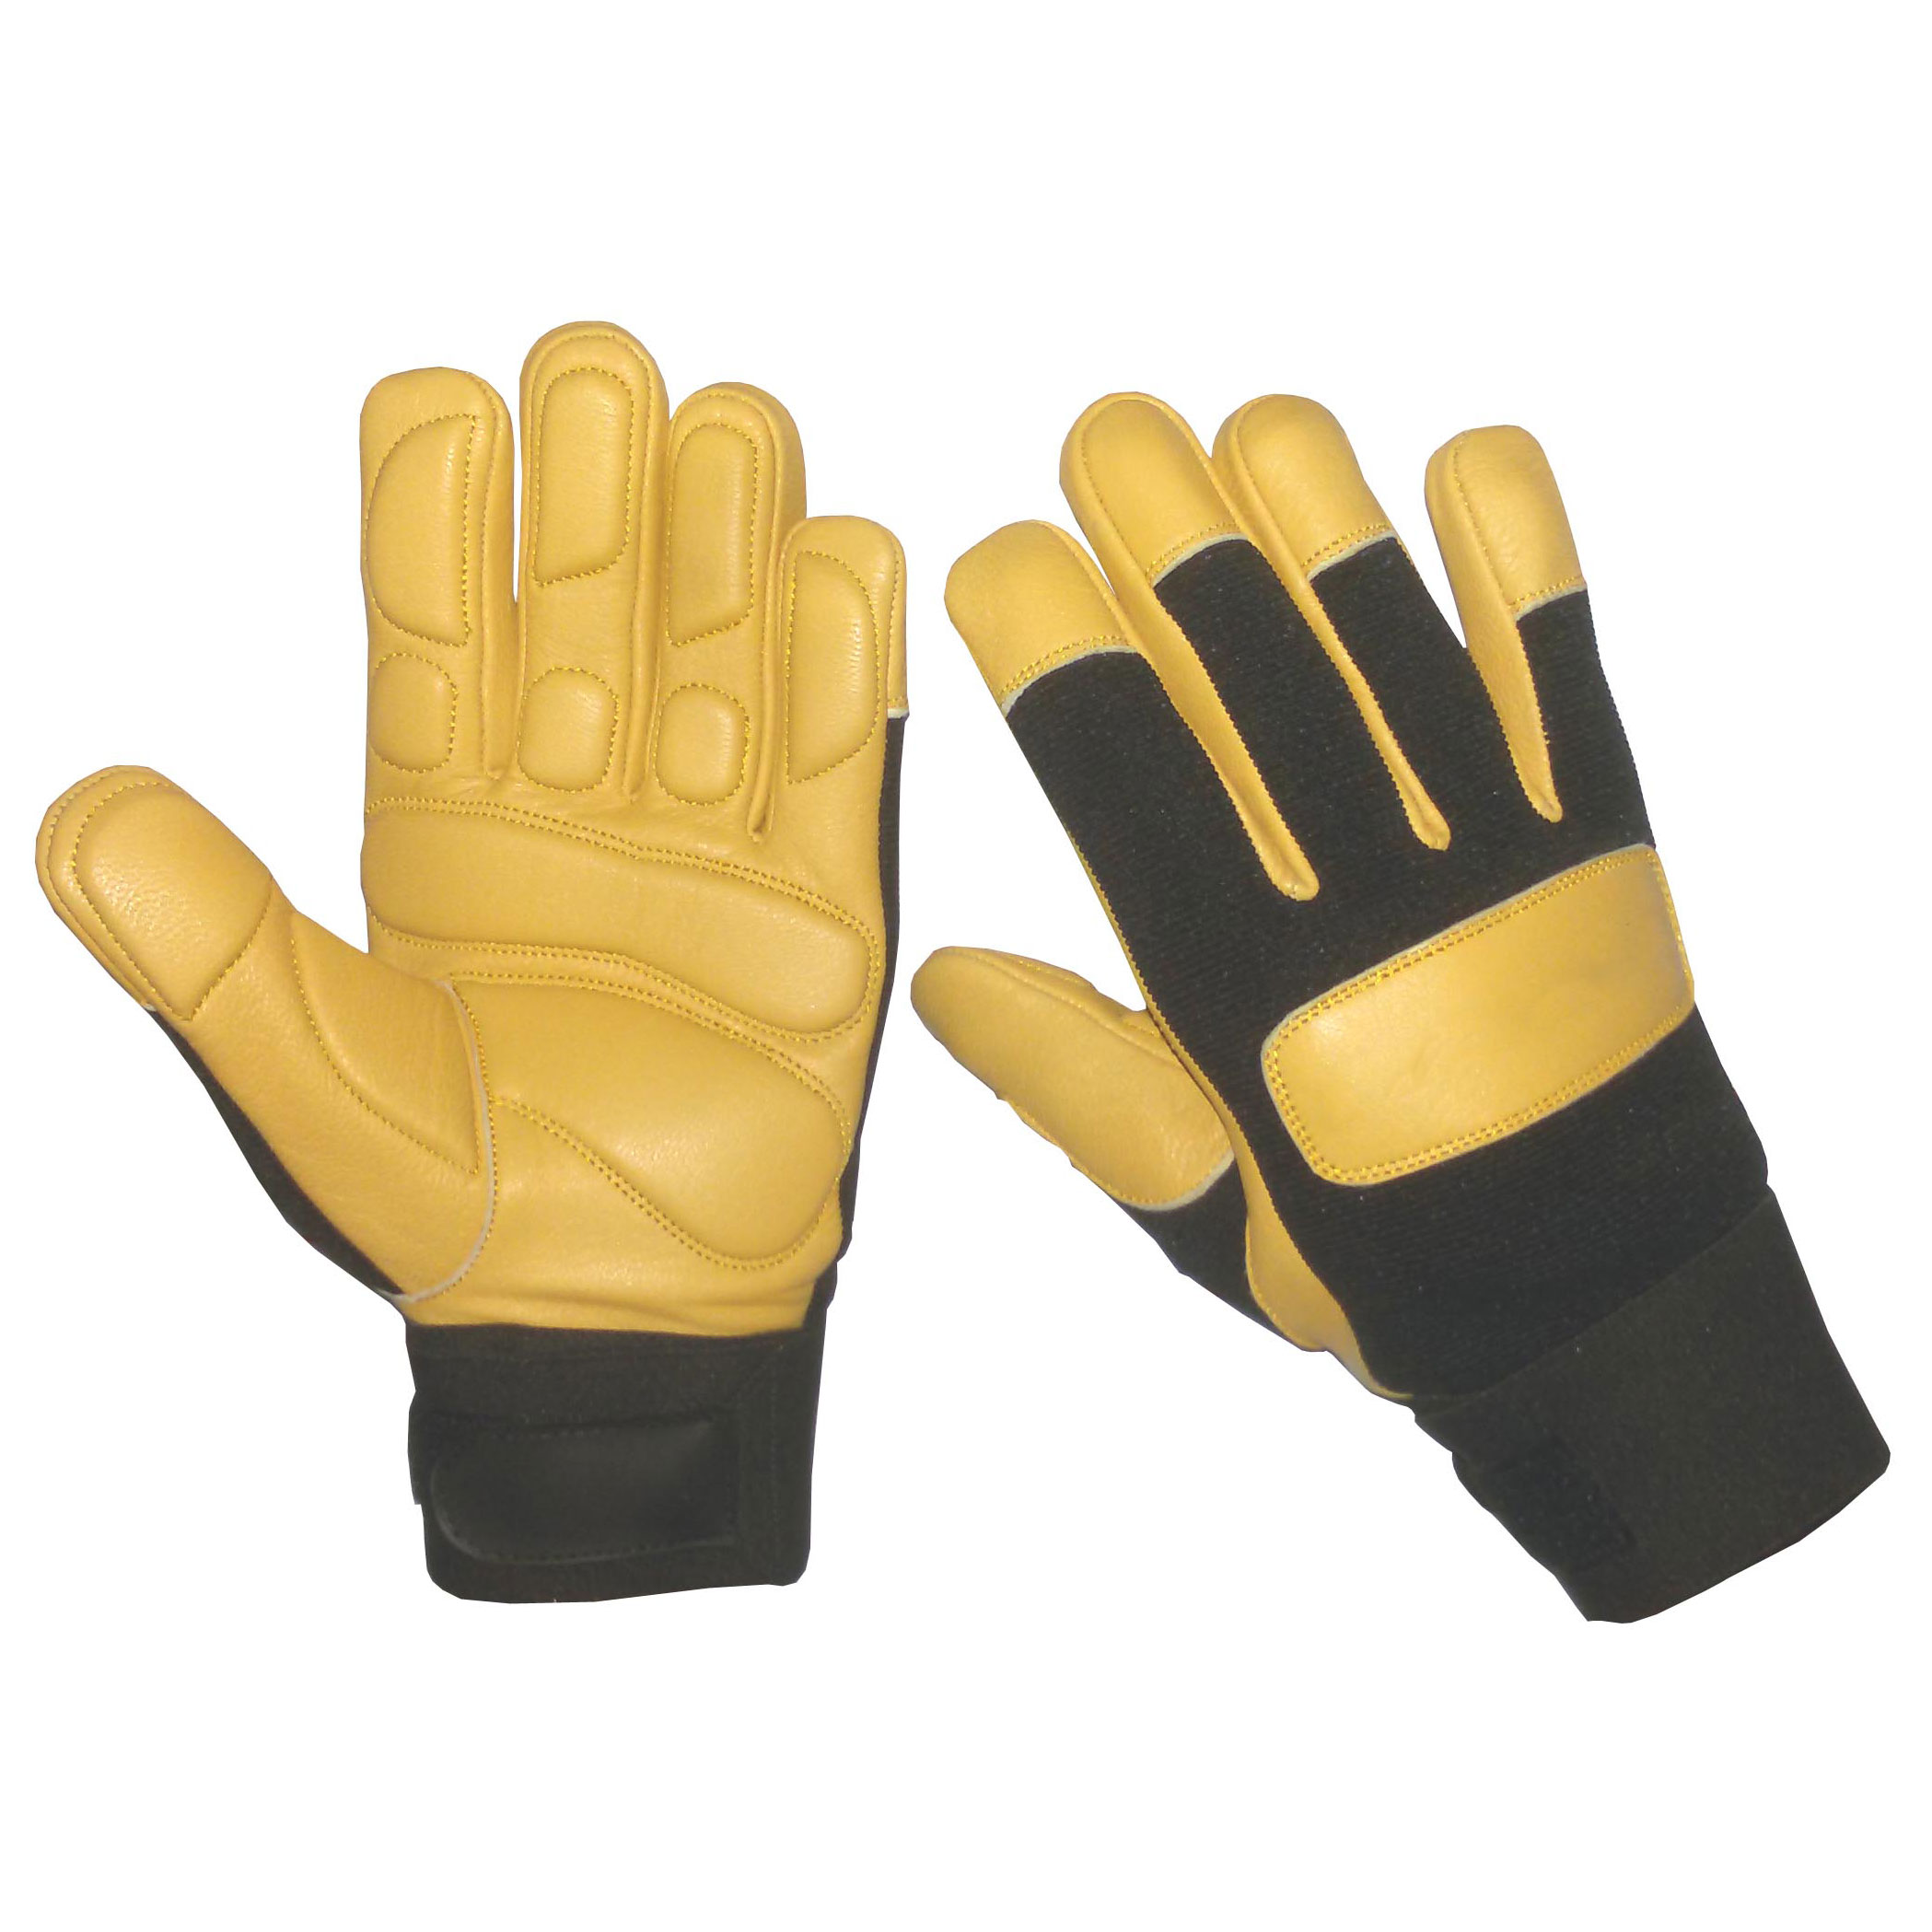 Mechanic Gloves In Goar Leather Anti-vibration Safety Power Tools Gloves For Pneumatic Tools